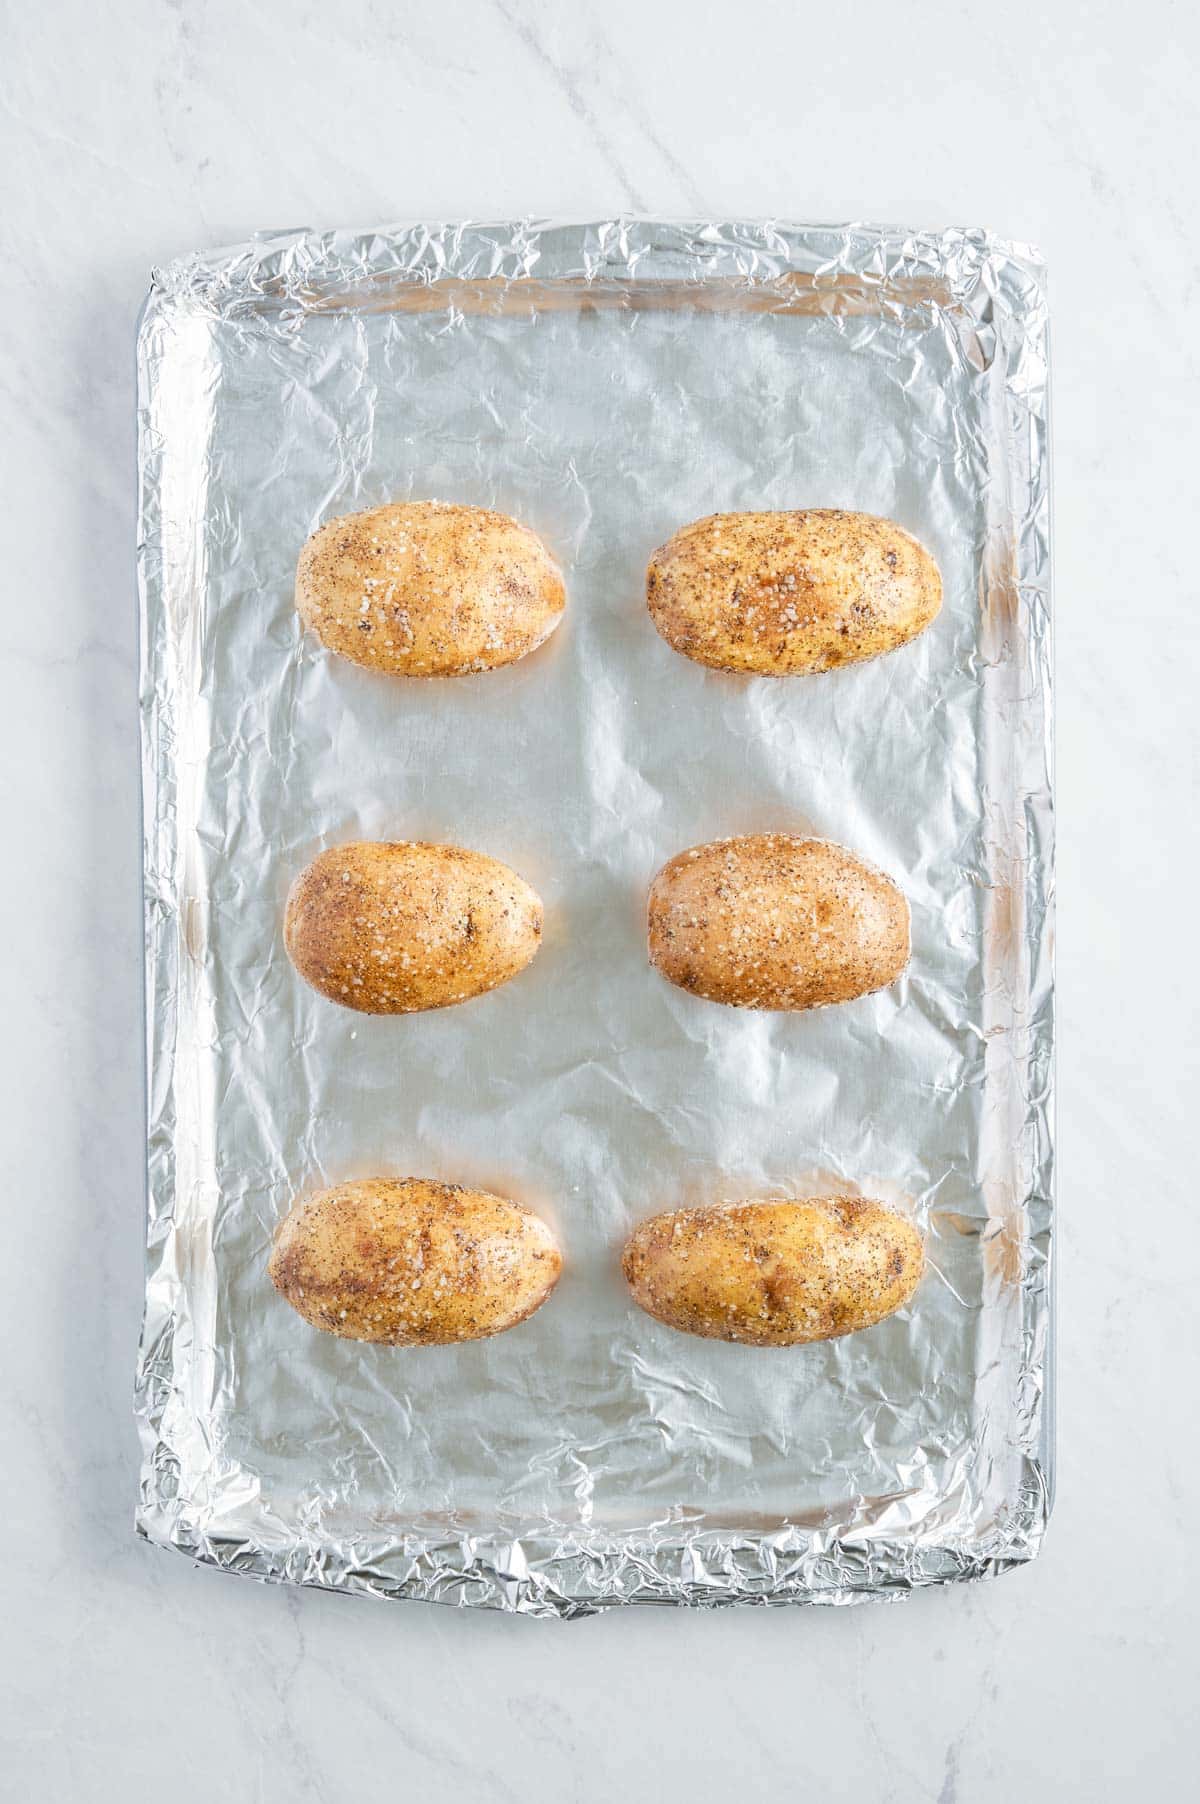 Potatoes are on a foil-lined baking sheet.